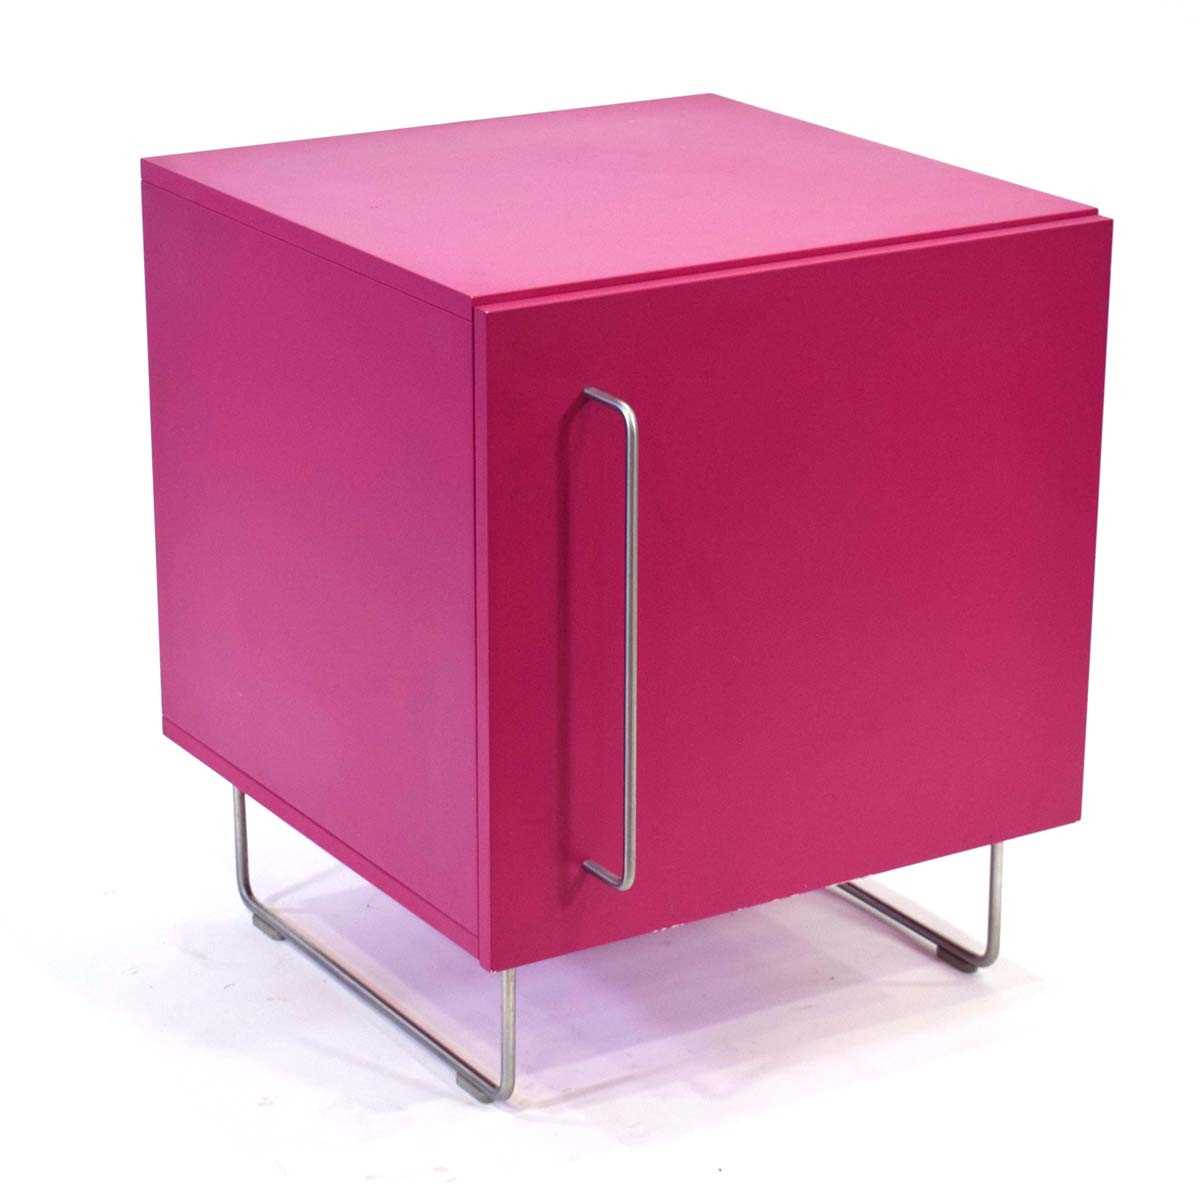 Jasper Morrison for Cappellini, a 'Plan' Range pink lacquered single-door cabinet with stainless - Image 2 of 3